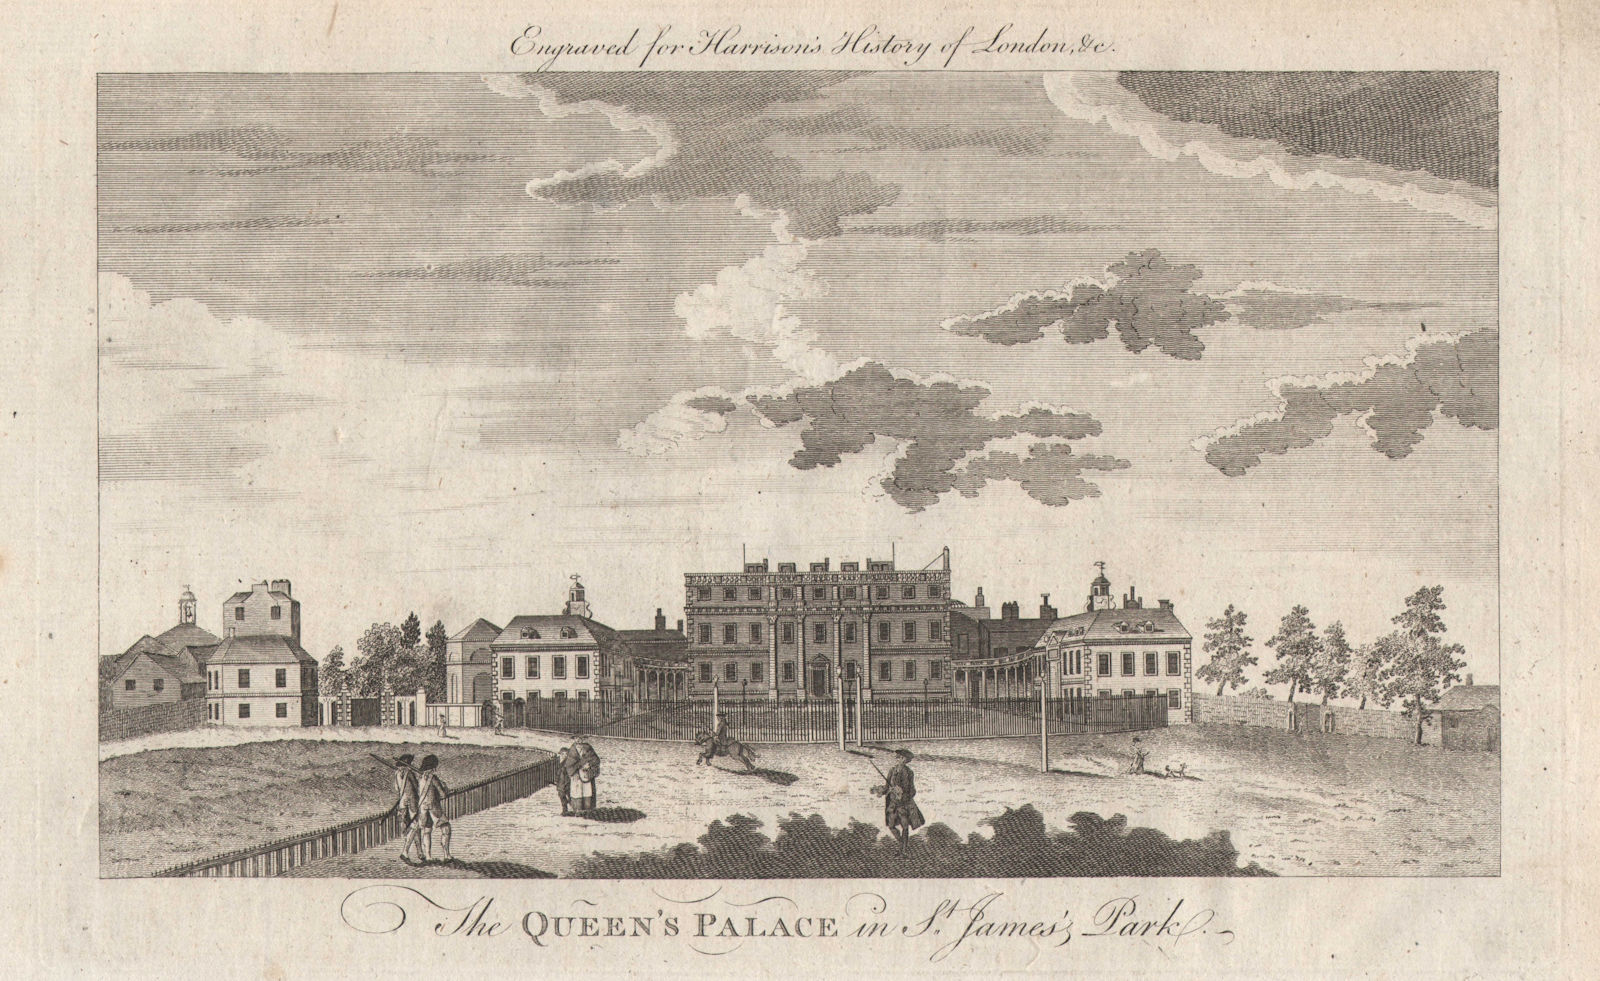 "The Queen's Palace in St James's Park". Now Buckingham Palace. HARRISON 1776